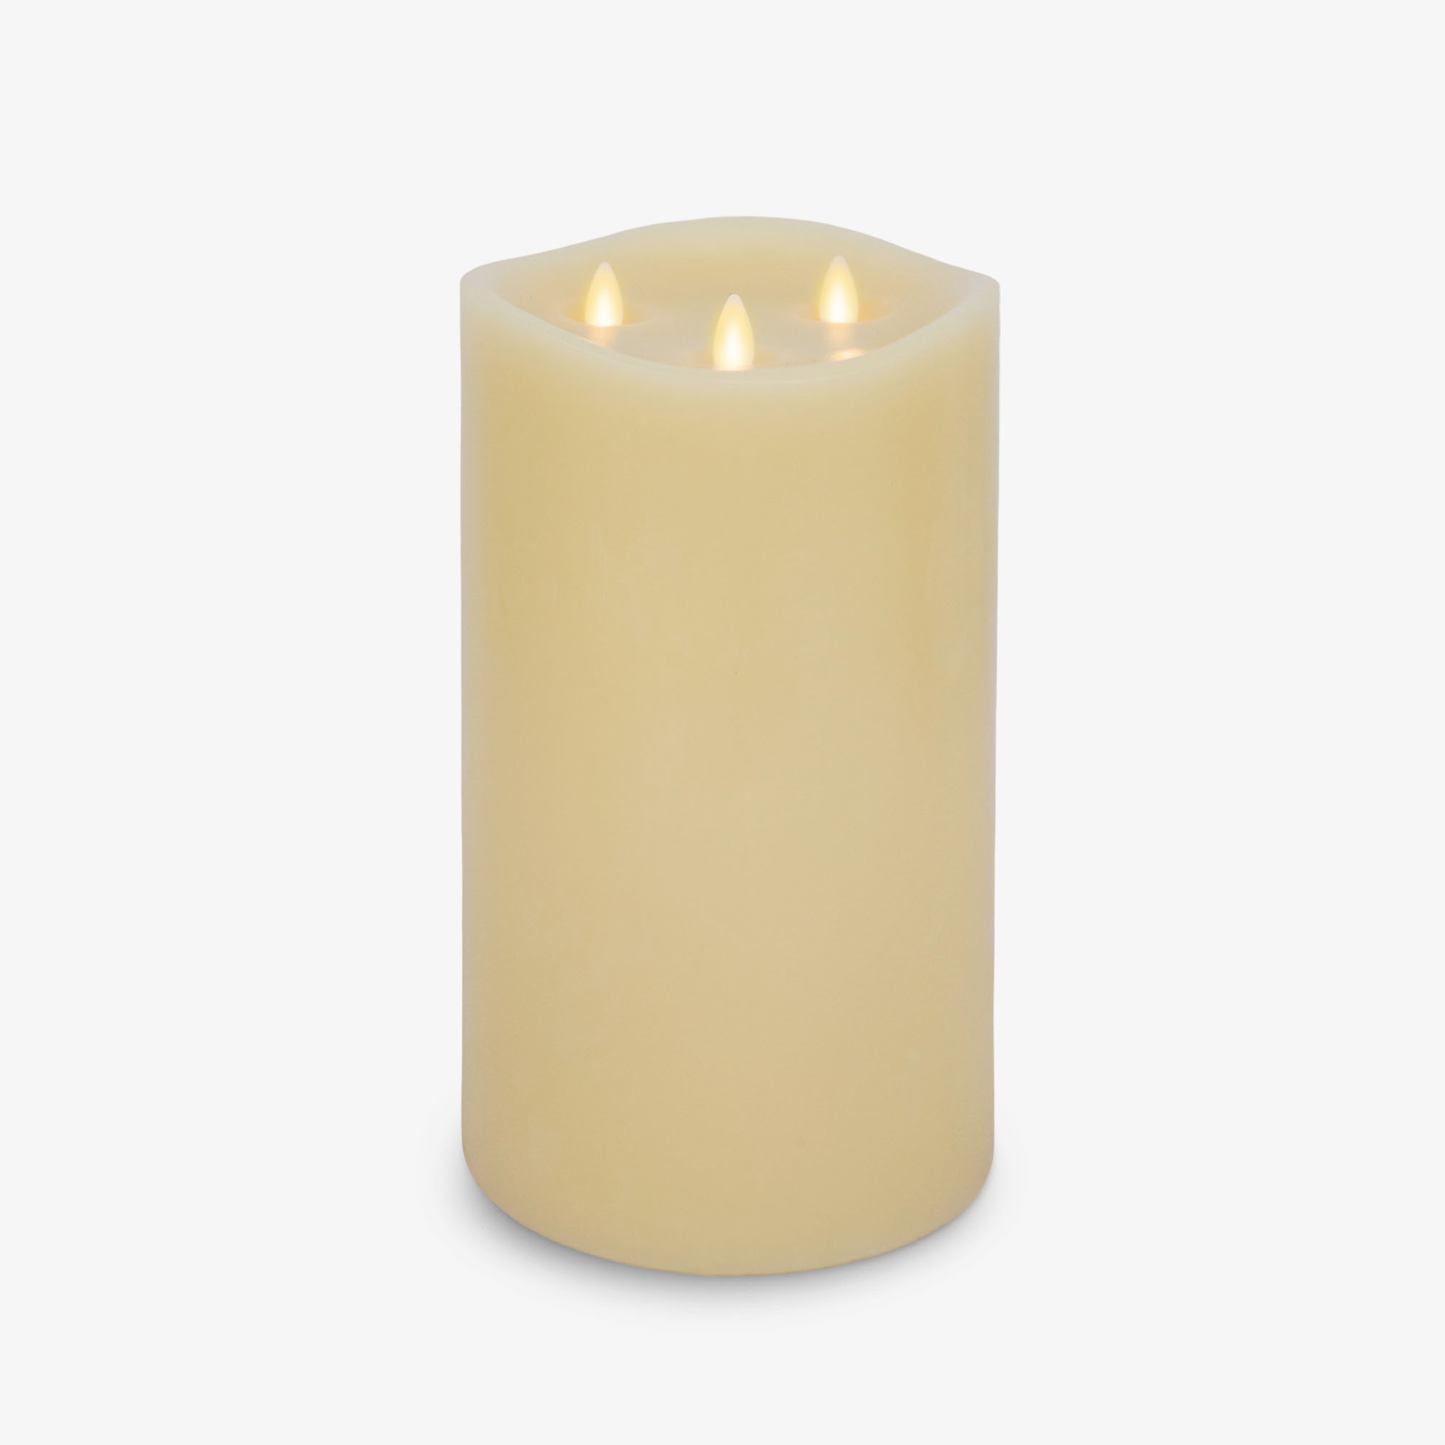 Ivory Flameless Candle Tri-Flame Grand Pillar - Melted Top